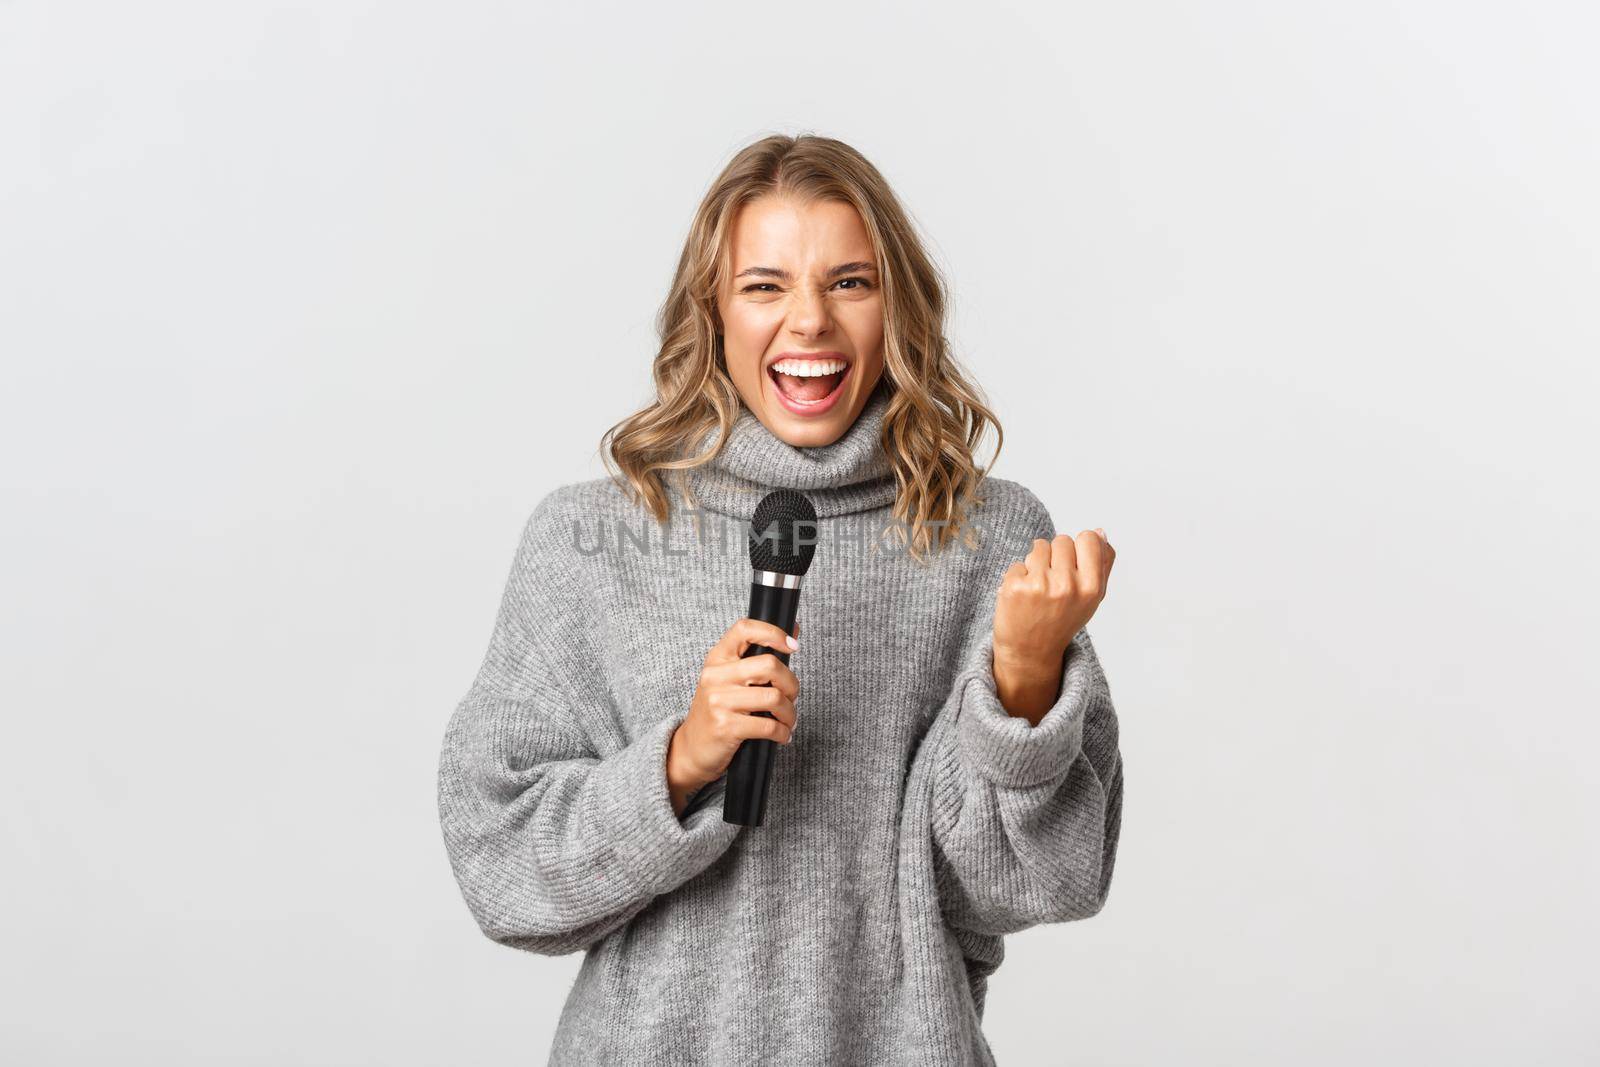 Sassy beautiful girl in grey sweater, looking excited and singing in microphone, standing over white background.